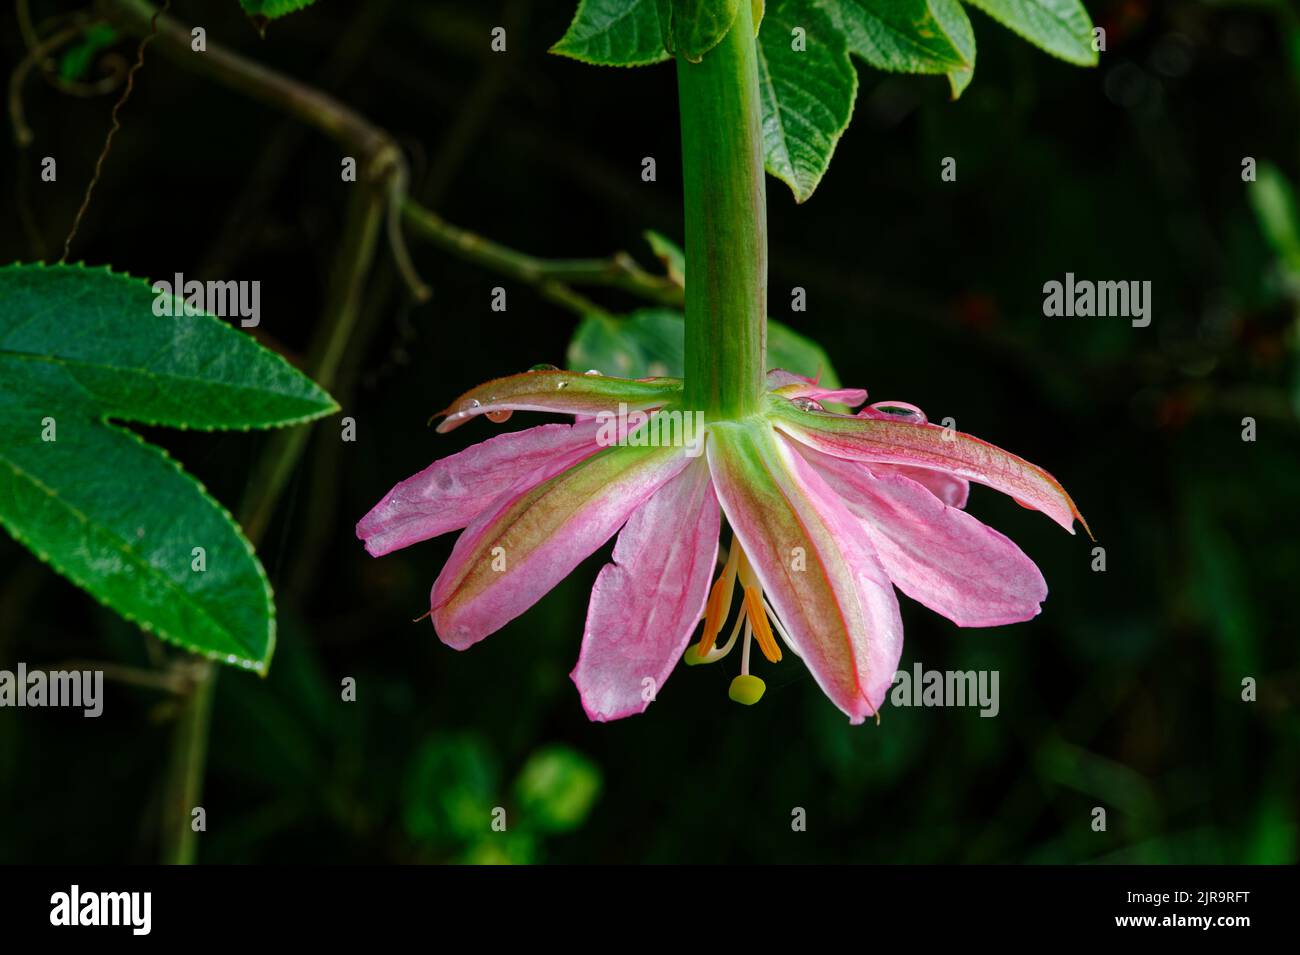 A view of the top of a banana passion fruit vine flower, which is an invasive weed in New Zeland Stock Photo